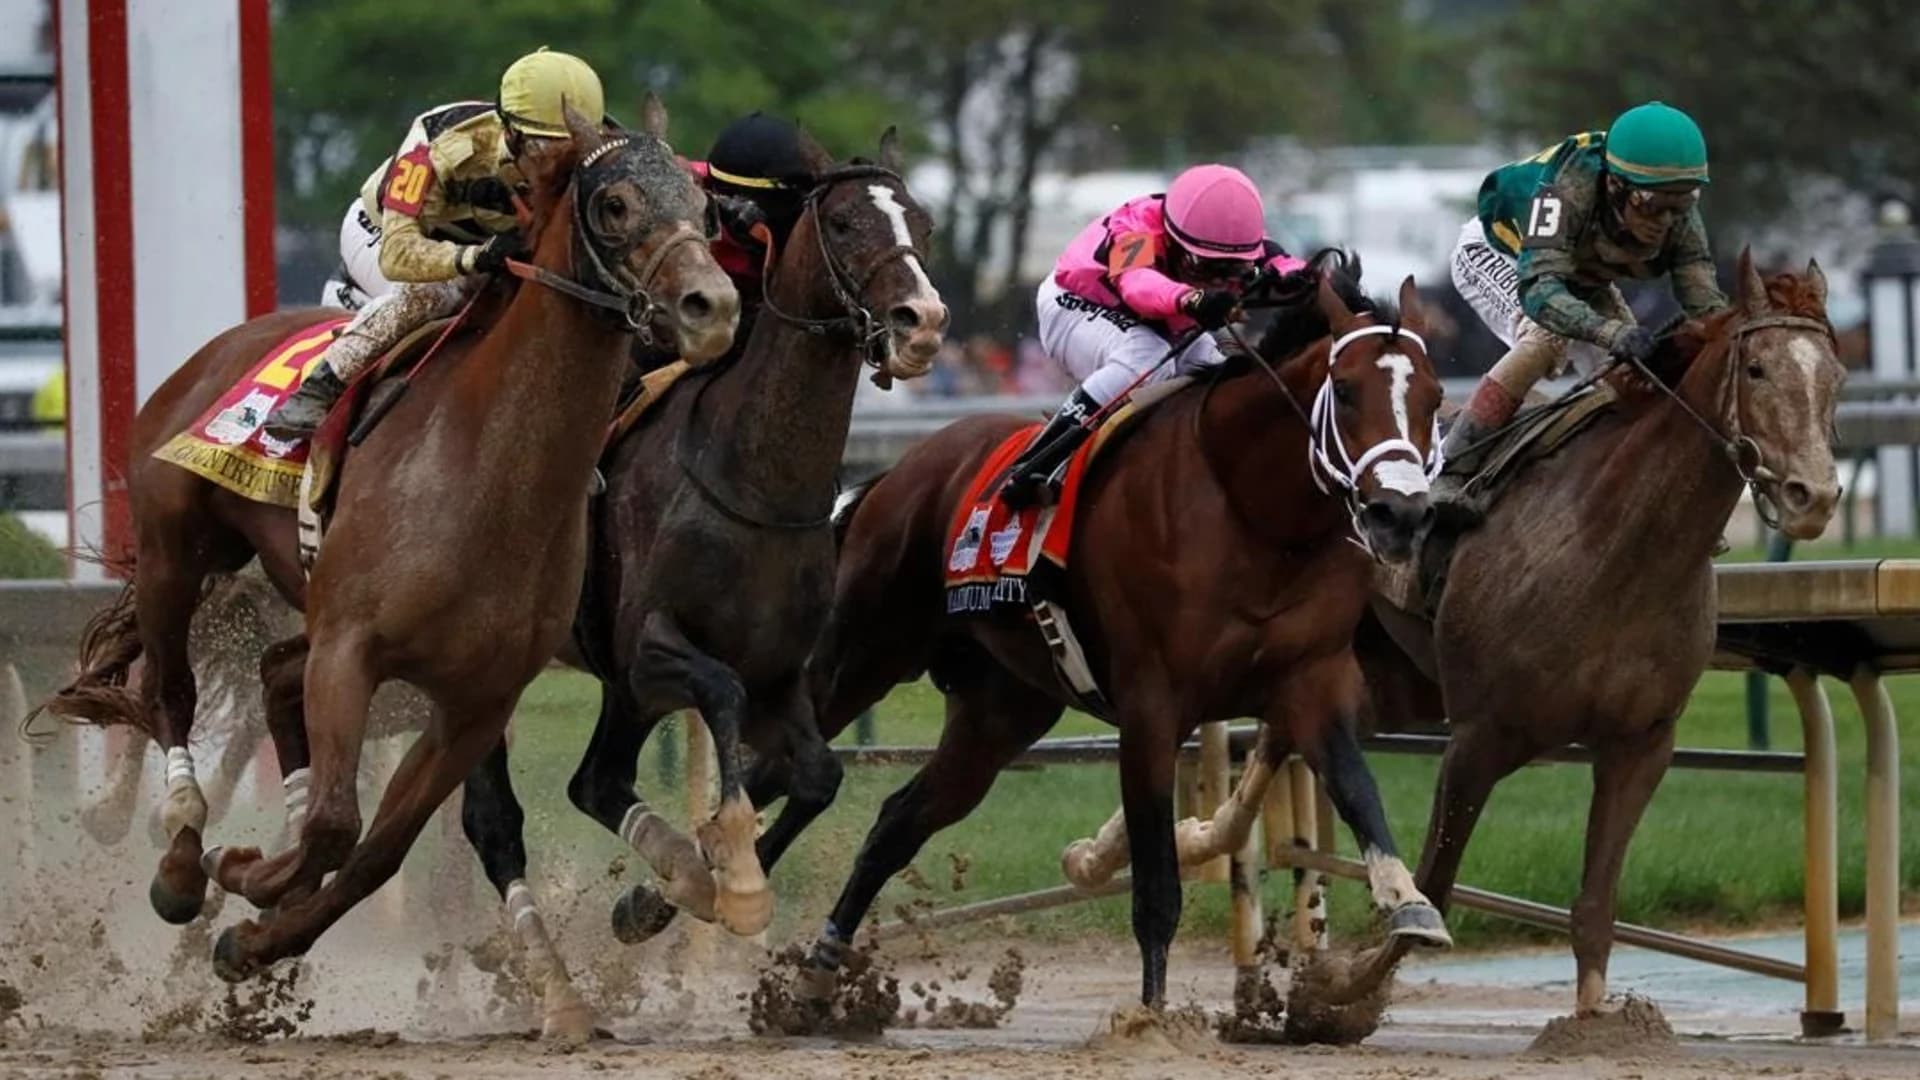 In stunner, Country House wins Kentucky Derby via DQ